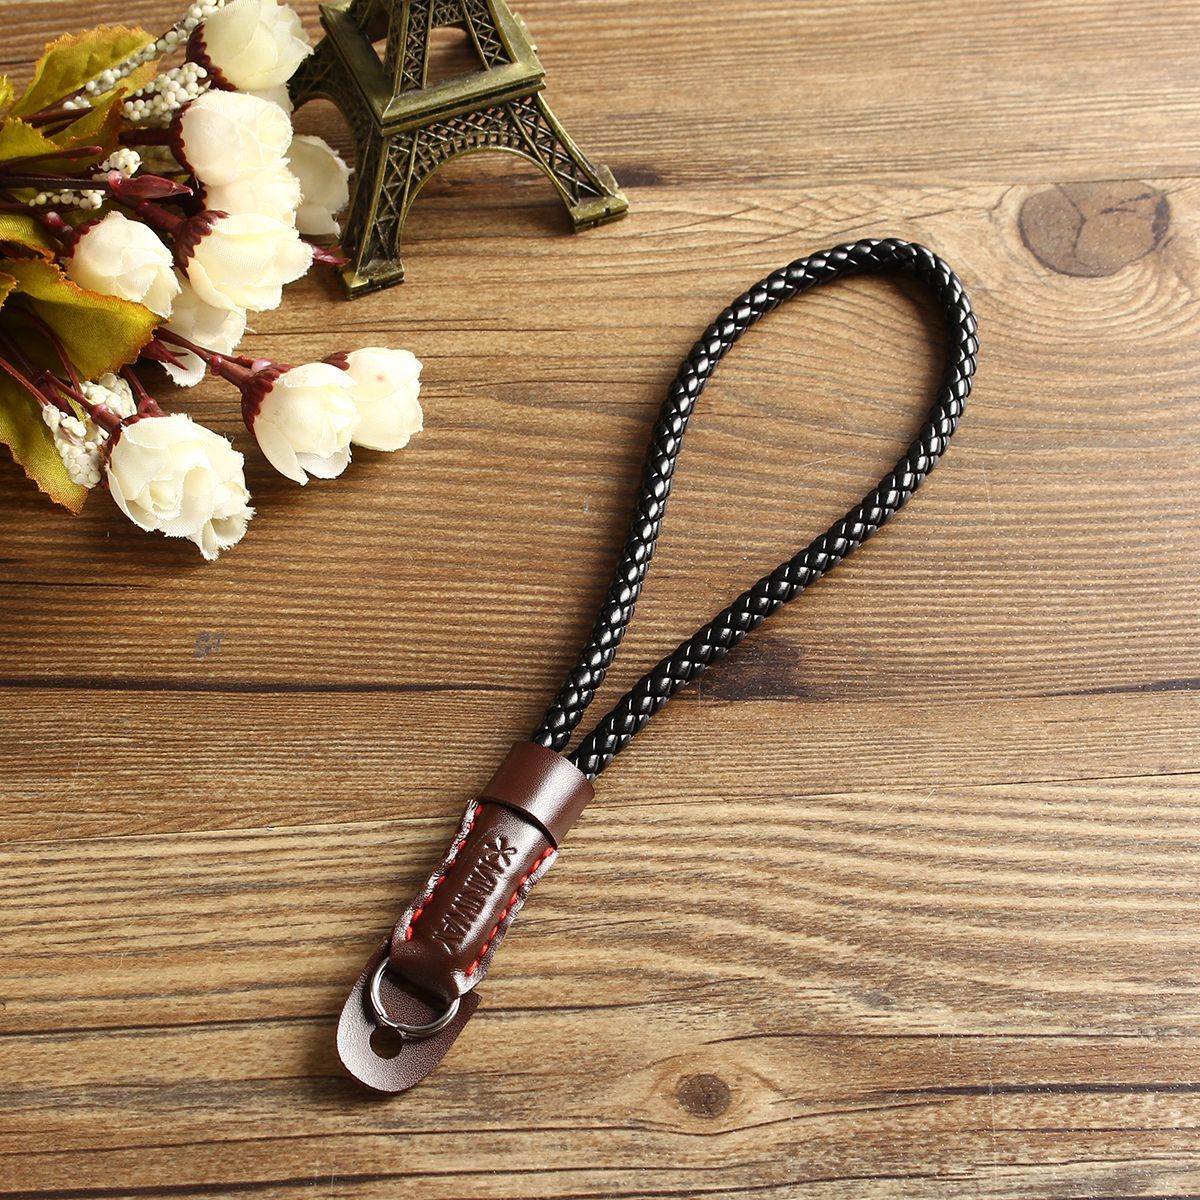 Universal-Digital-Camera-Color-Hand-Rope-Canvas-PU-Leather-Cotton-Lanyard-Hand-Wrist-Strap-1283009